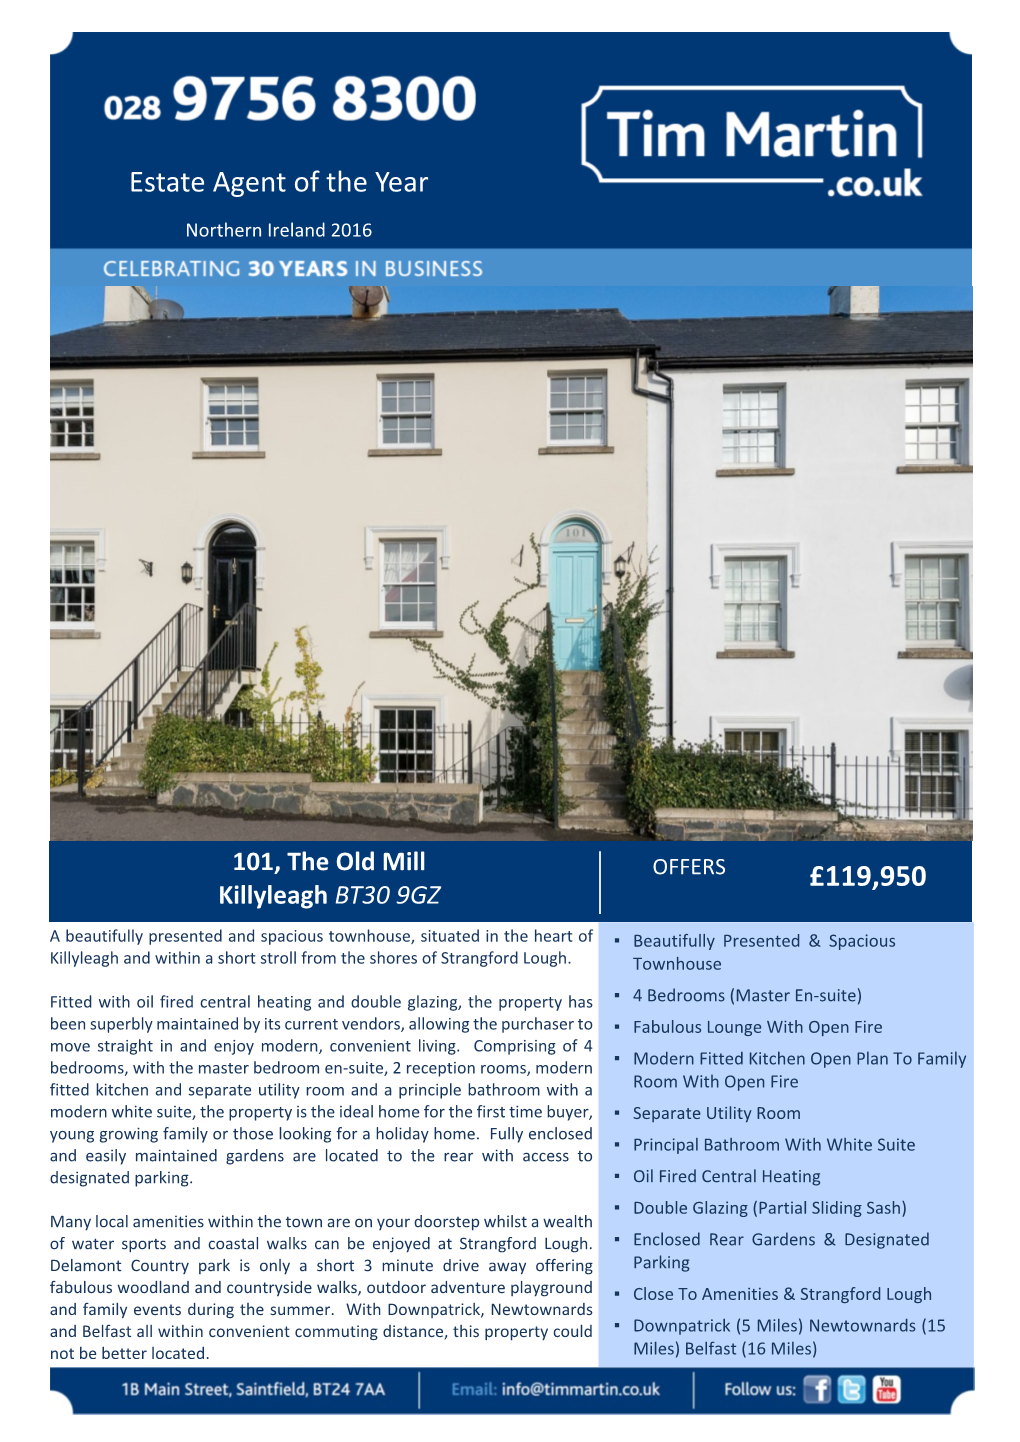 101 the Old Mill, Killyleagh Brochure